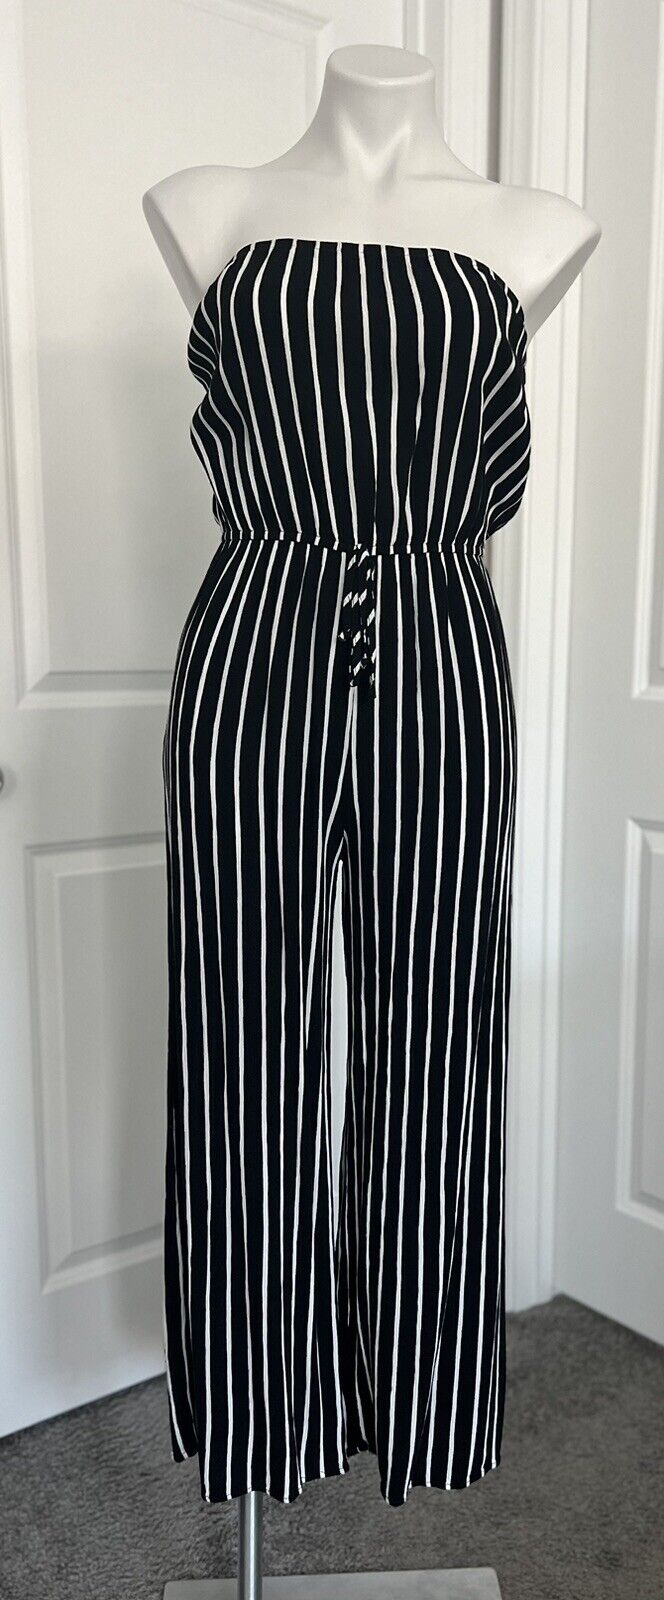 Ambiance Black And White Stripped Halter Romper S… - image 1